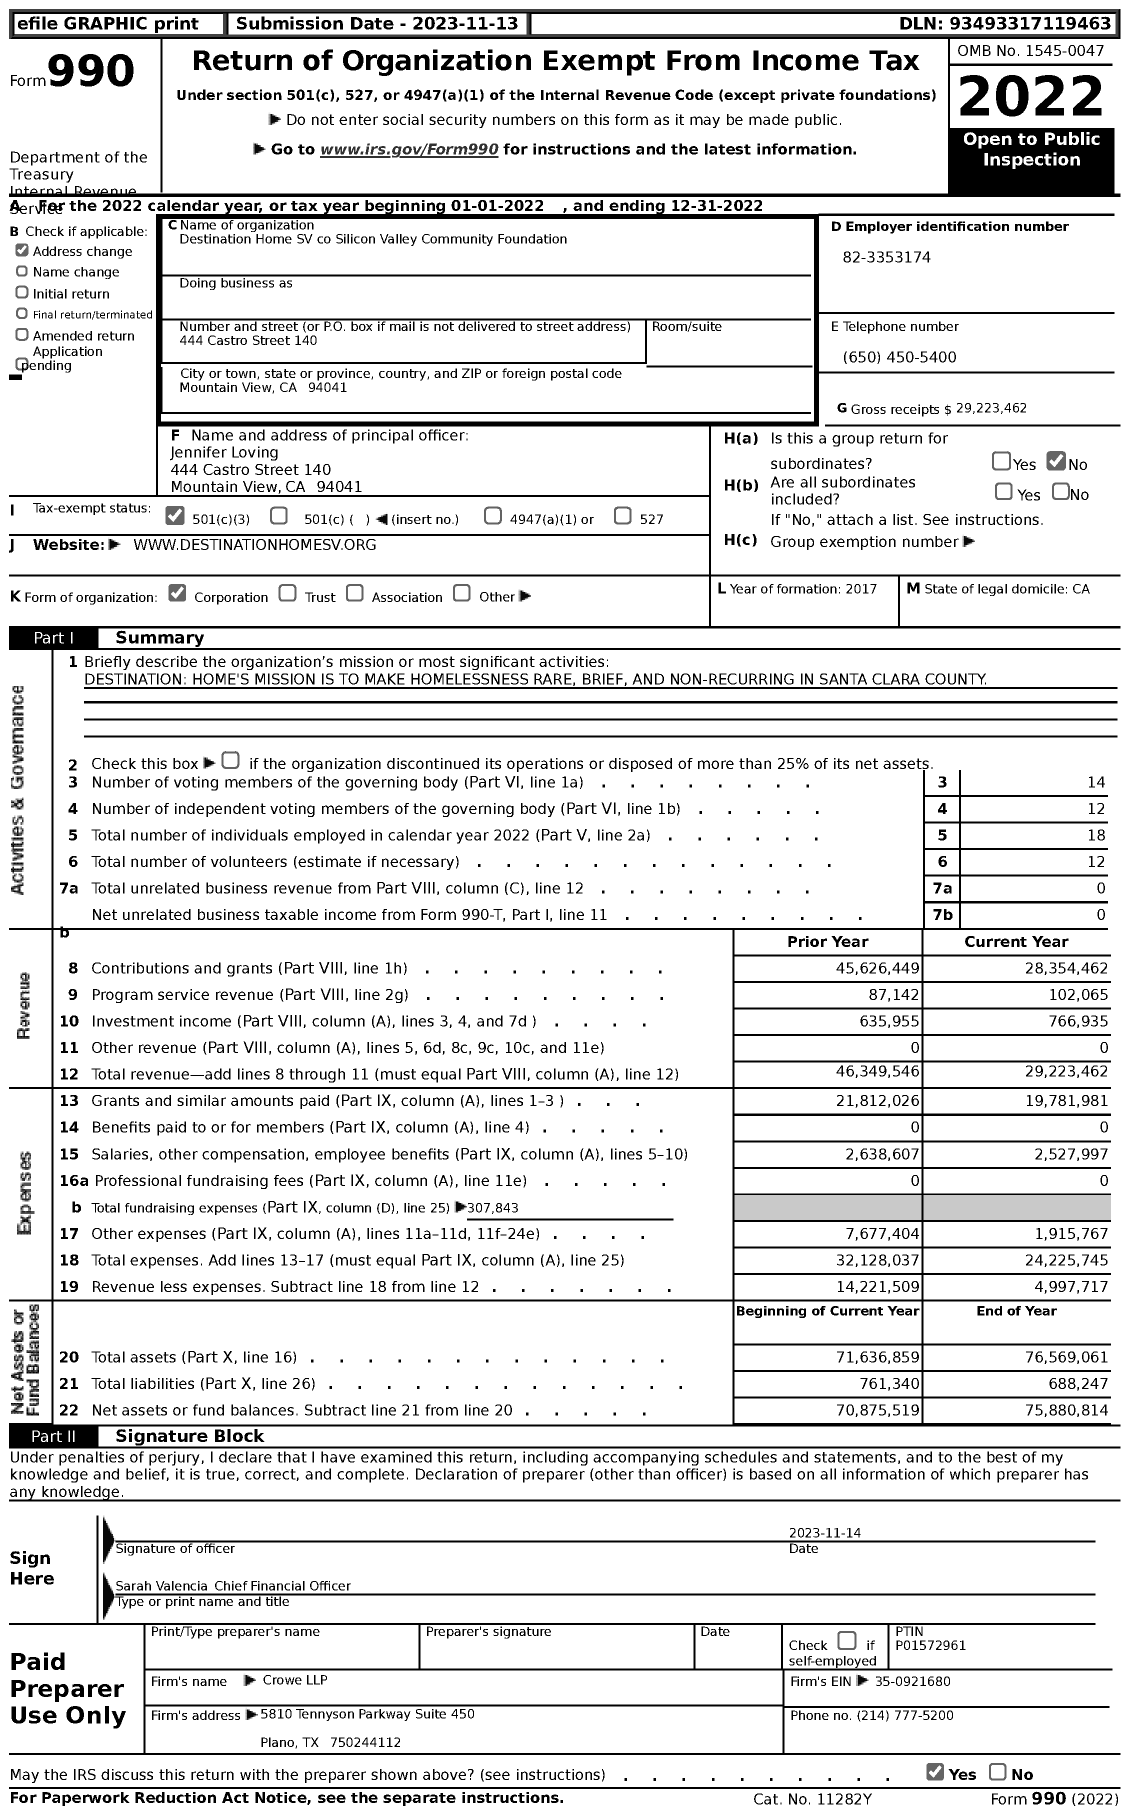 Image of first page of 2022 Form 990 for Destination Home SV CO SILICON Valley COMMUNITY FOUNDATION